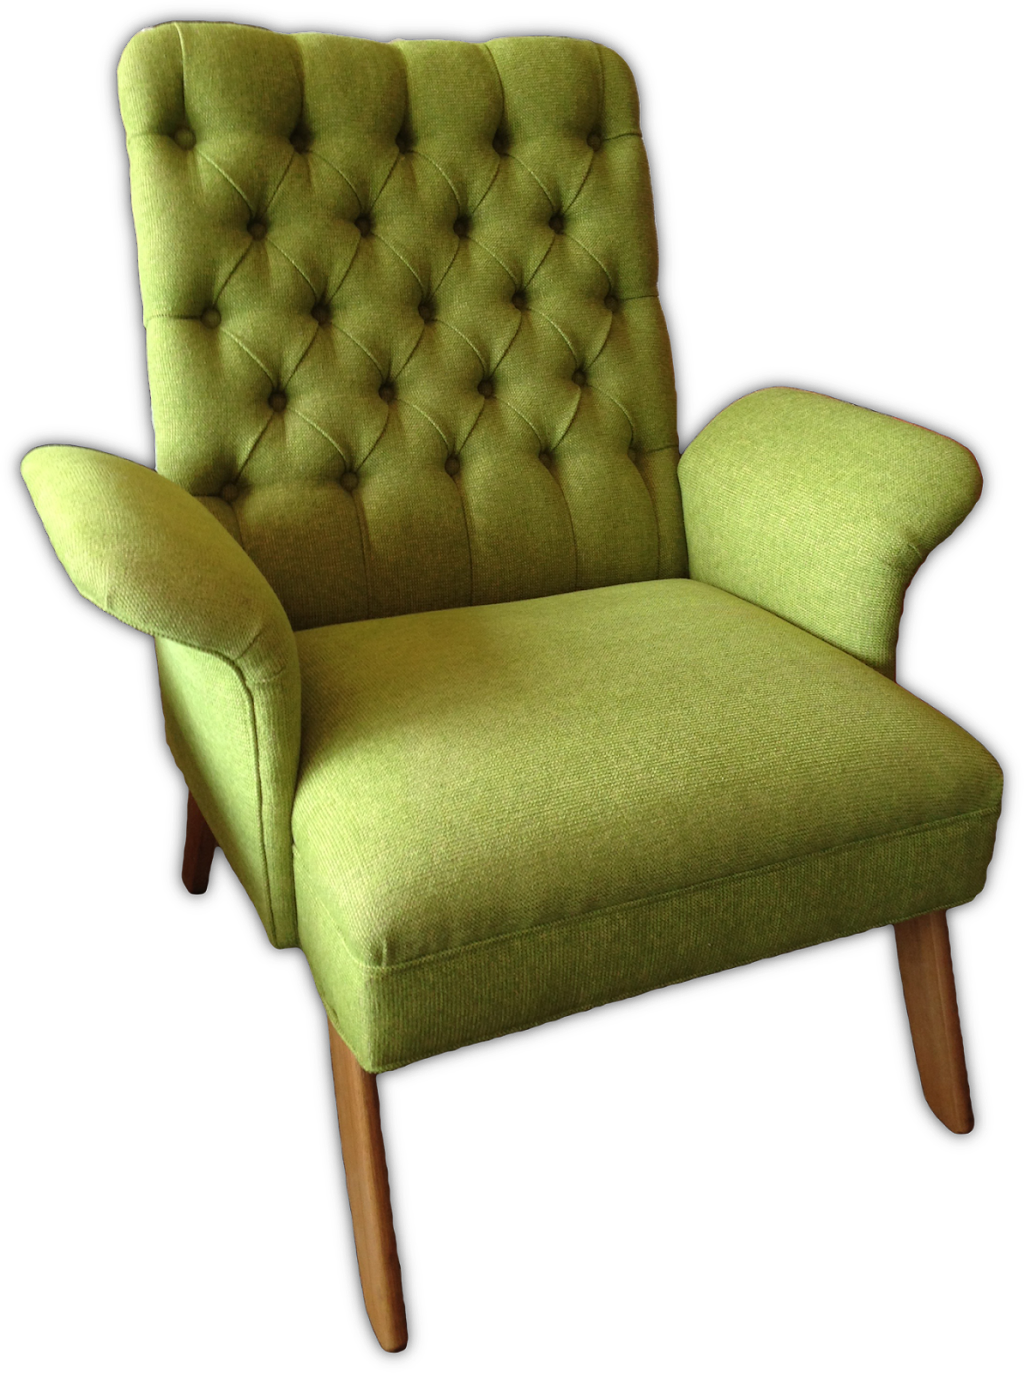 Charles Caddy Upholstery | furniture store | 118 Barker St, Castlemaine VIC 3450, Australia | 0354723232 OR +61 3 5472 3232